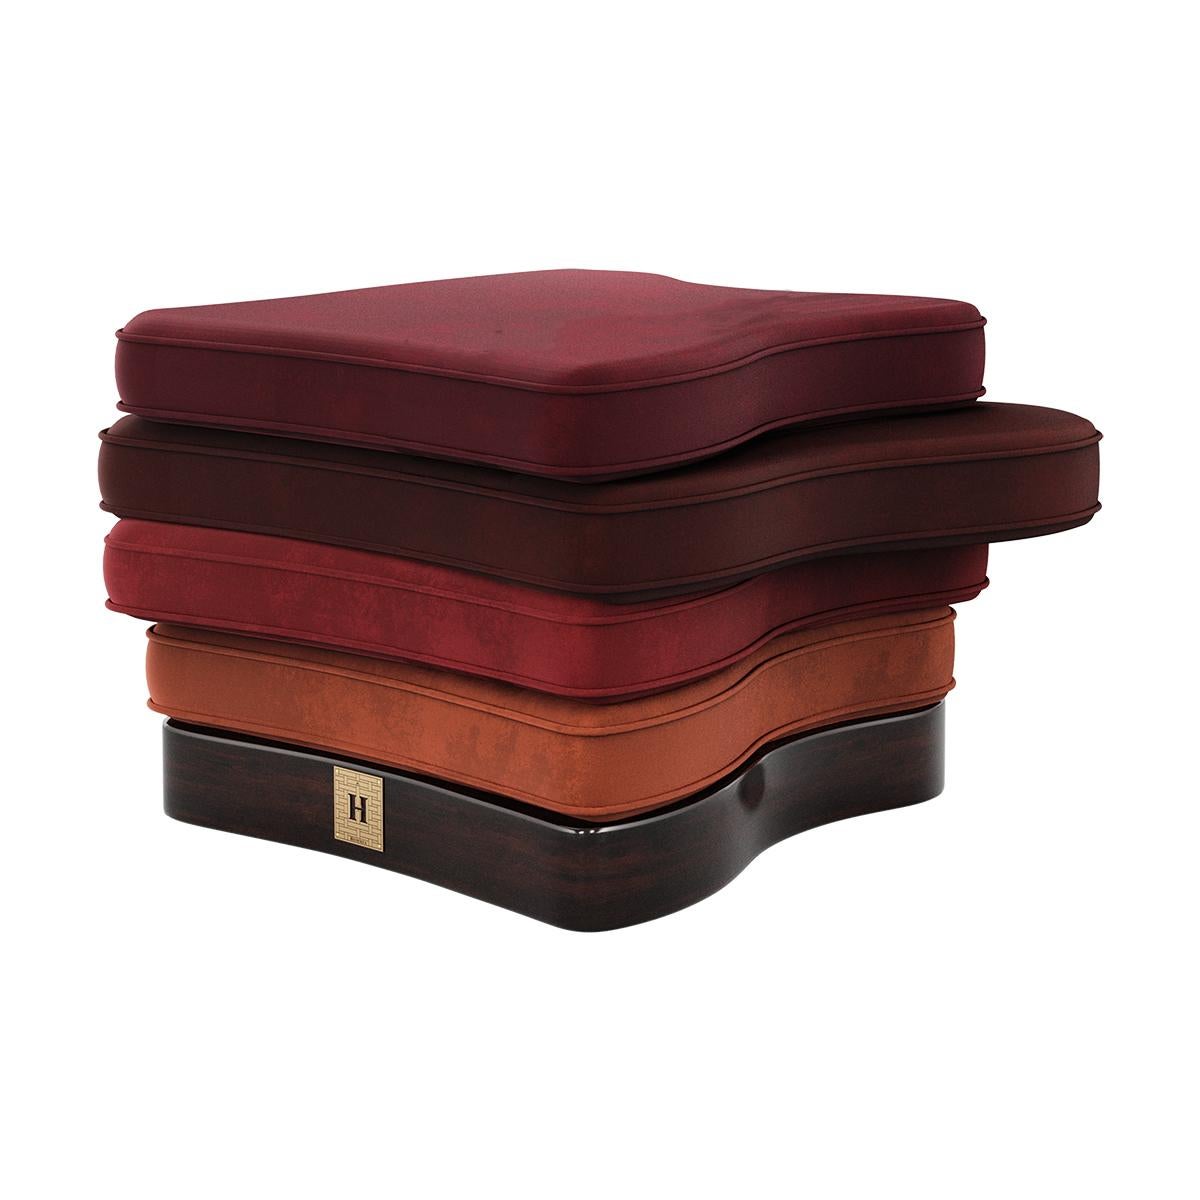 Cadiz Stool is a Memphis design style stool, which combines bold shapes with comfort. A modern design stool, upholstered in velvet, for any living area or current hotel lobby project.

Materials: Upholstered in Velvet; Base in Ebony